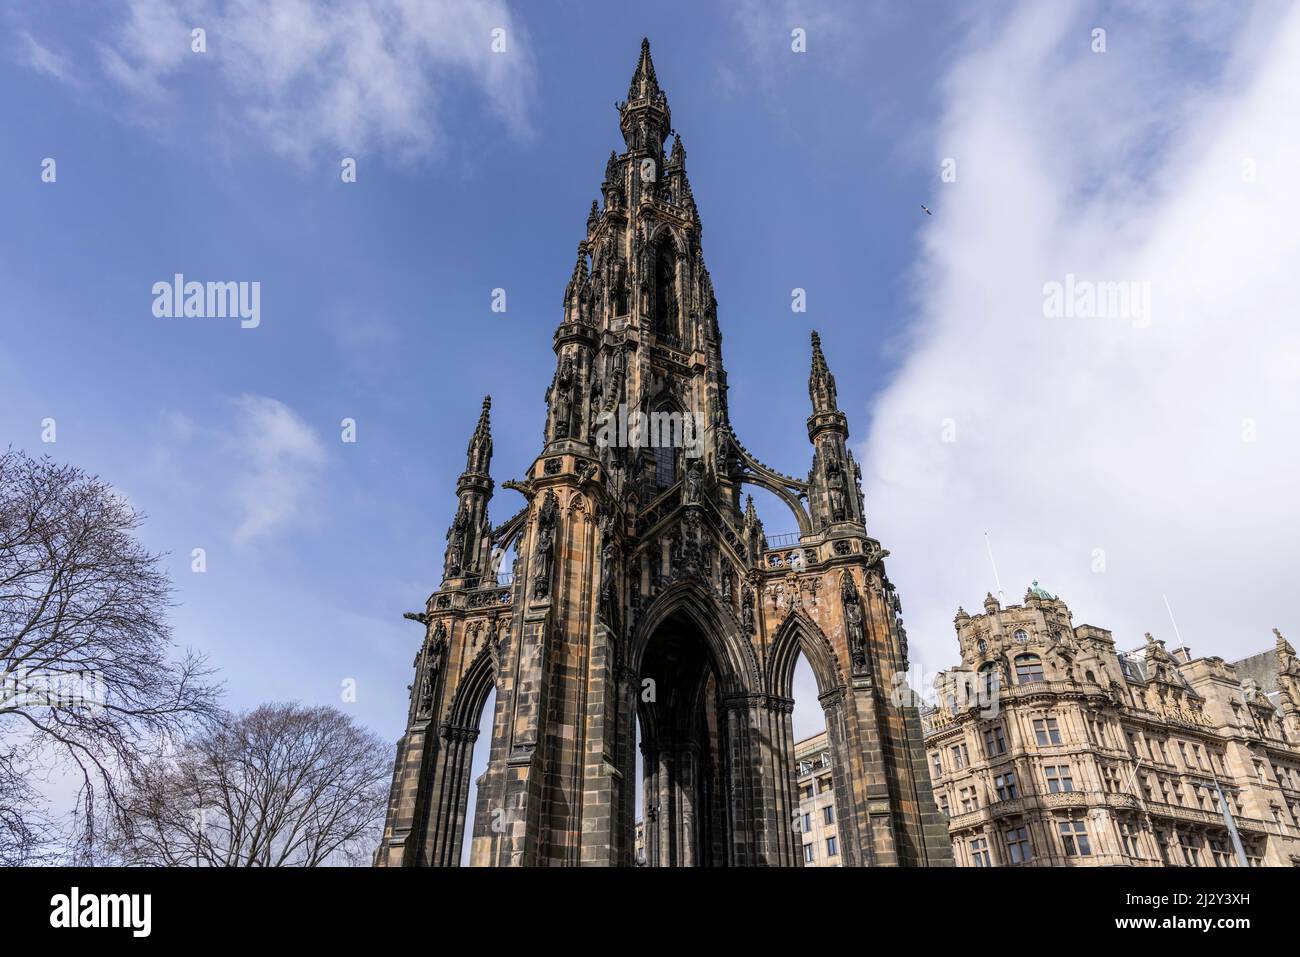 Scott Monument. Canon EOS R5, RF24-105mm F4 L IS USM at 24mm, ISO 100, 1/400s at f/8. Apr Stock Photo